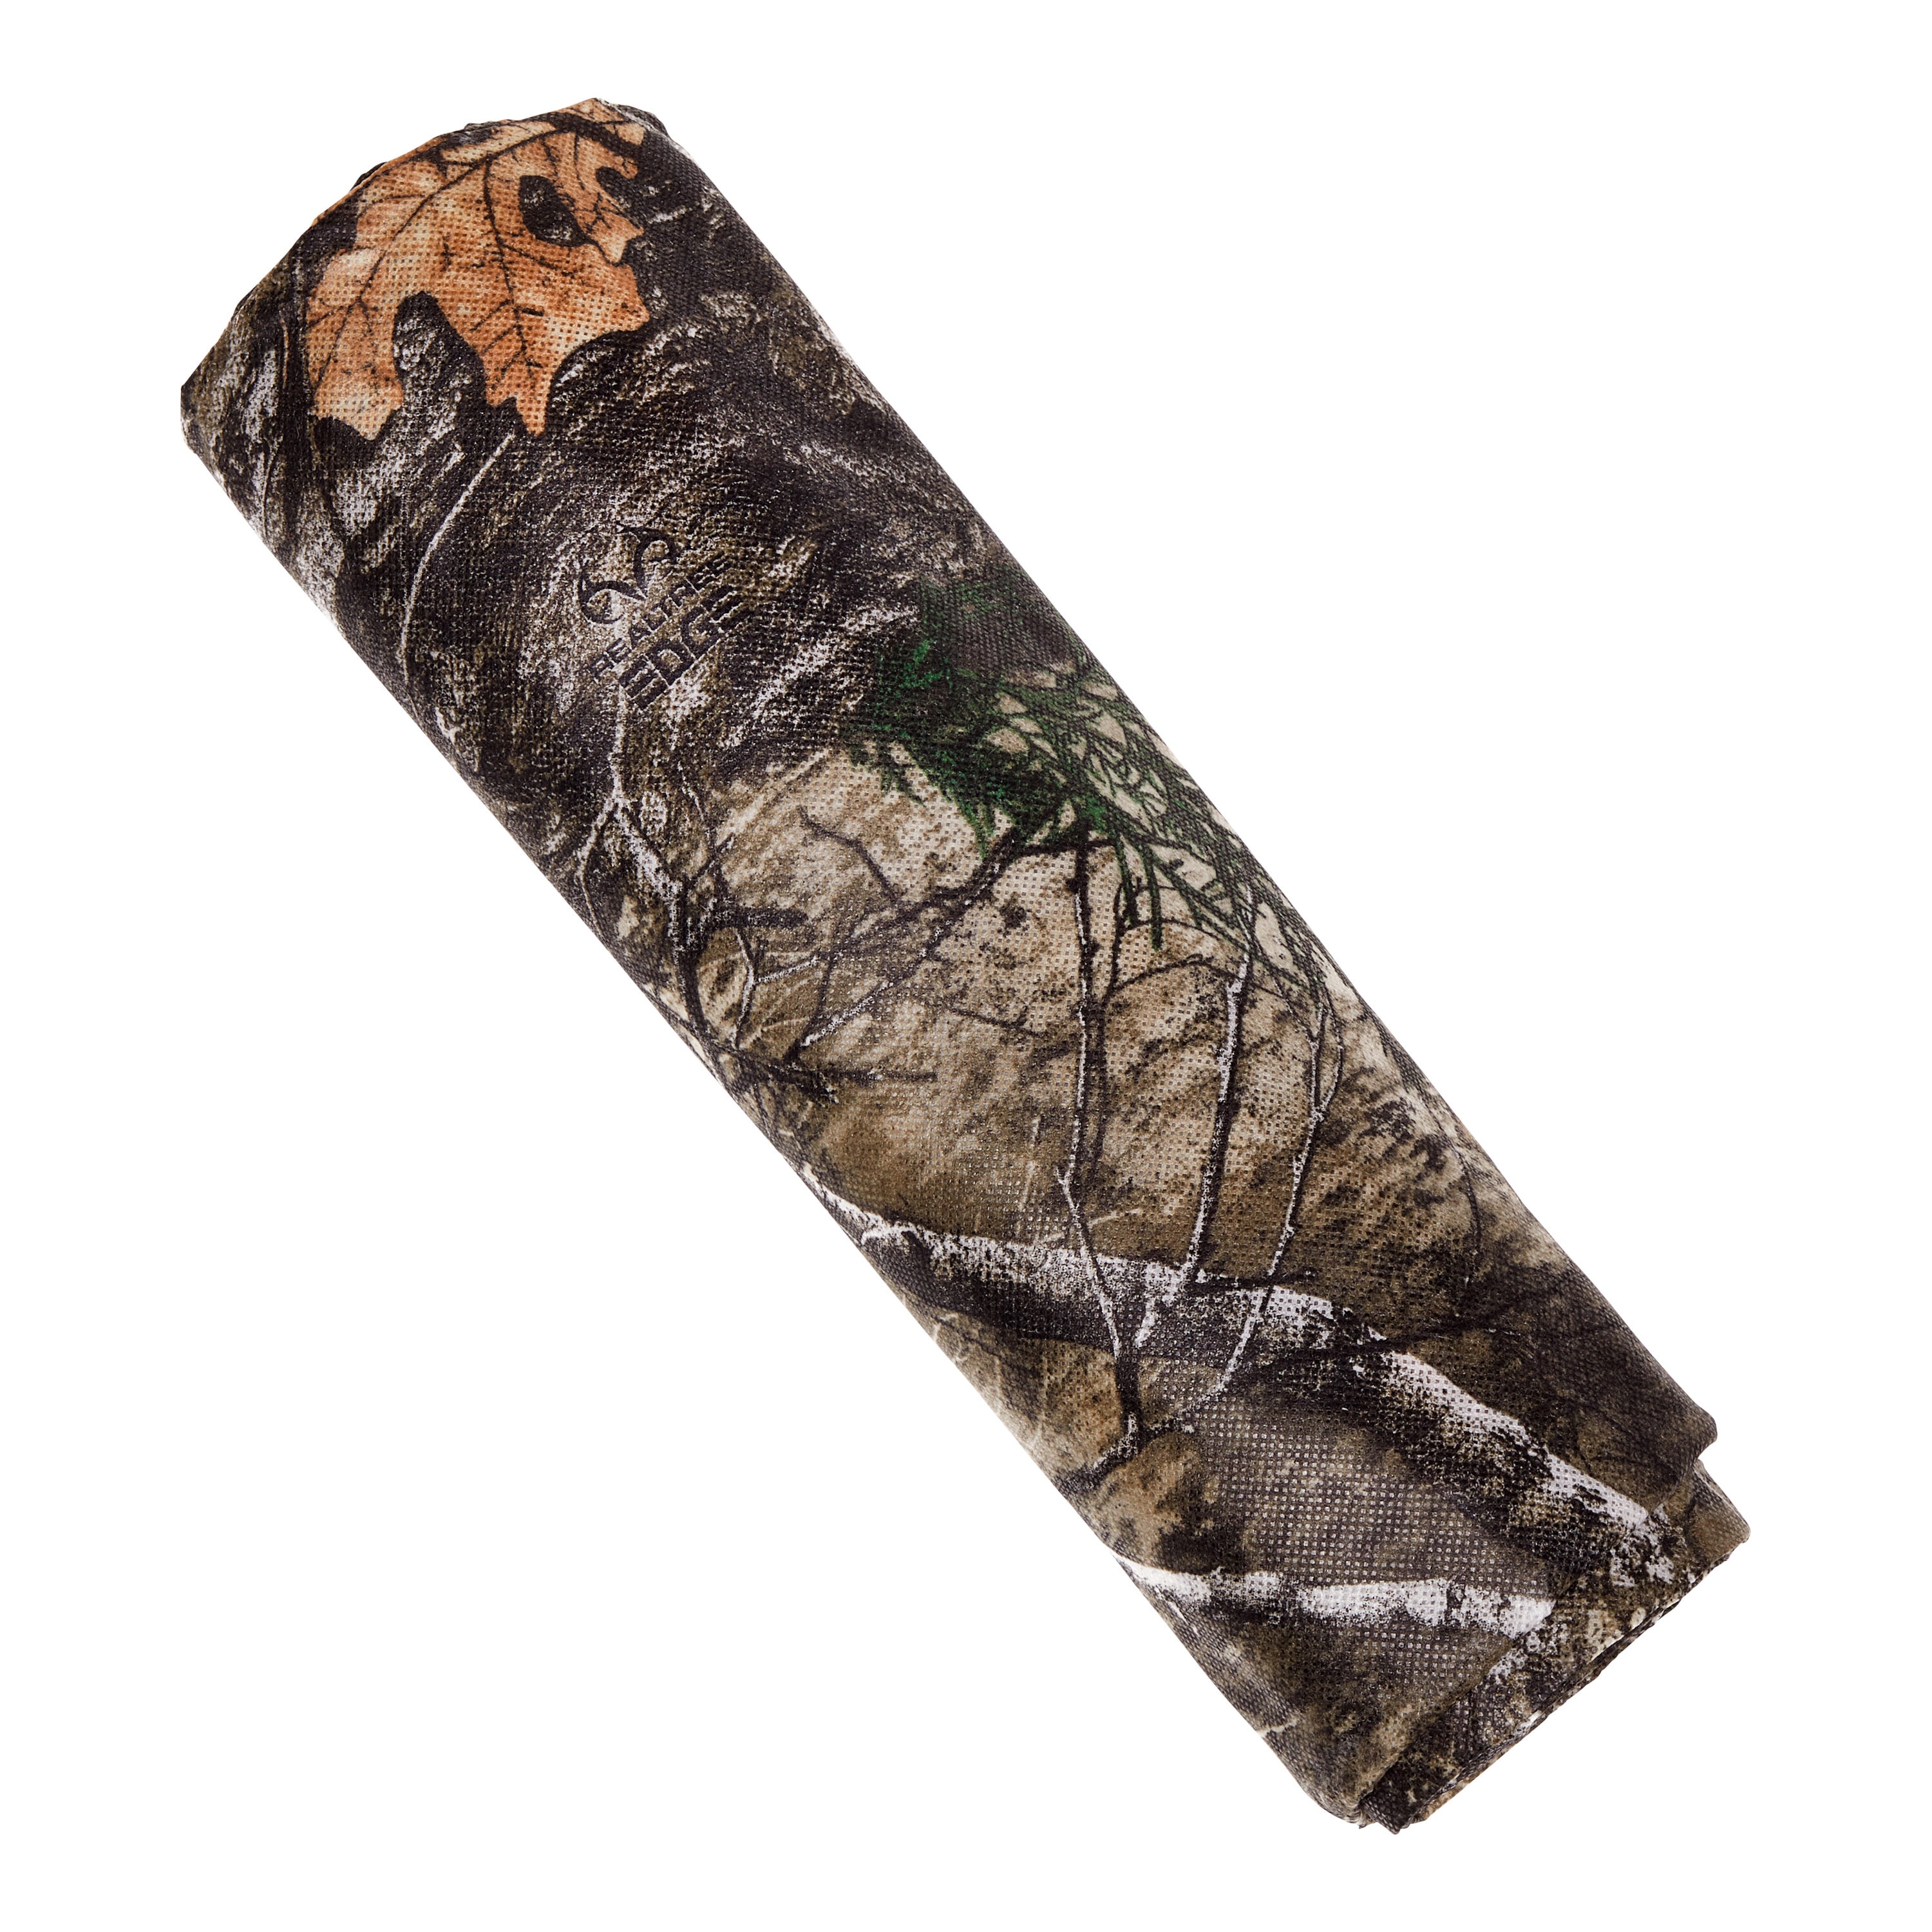 Allen Company Vanish Hunting Blind Burlap, 12ft x 54 in - Mossy  Oak/Realtree/Grain Belt Camo, for Hunting Ground Blinds, Tree Stands and  More